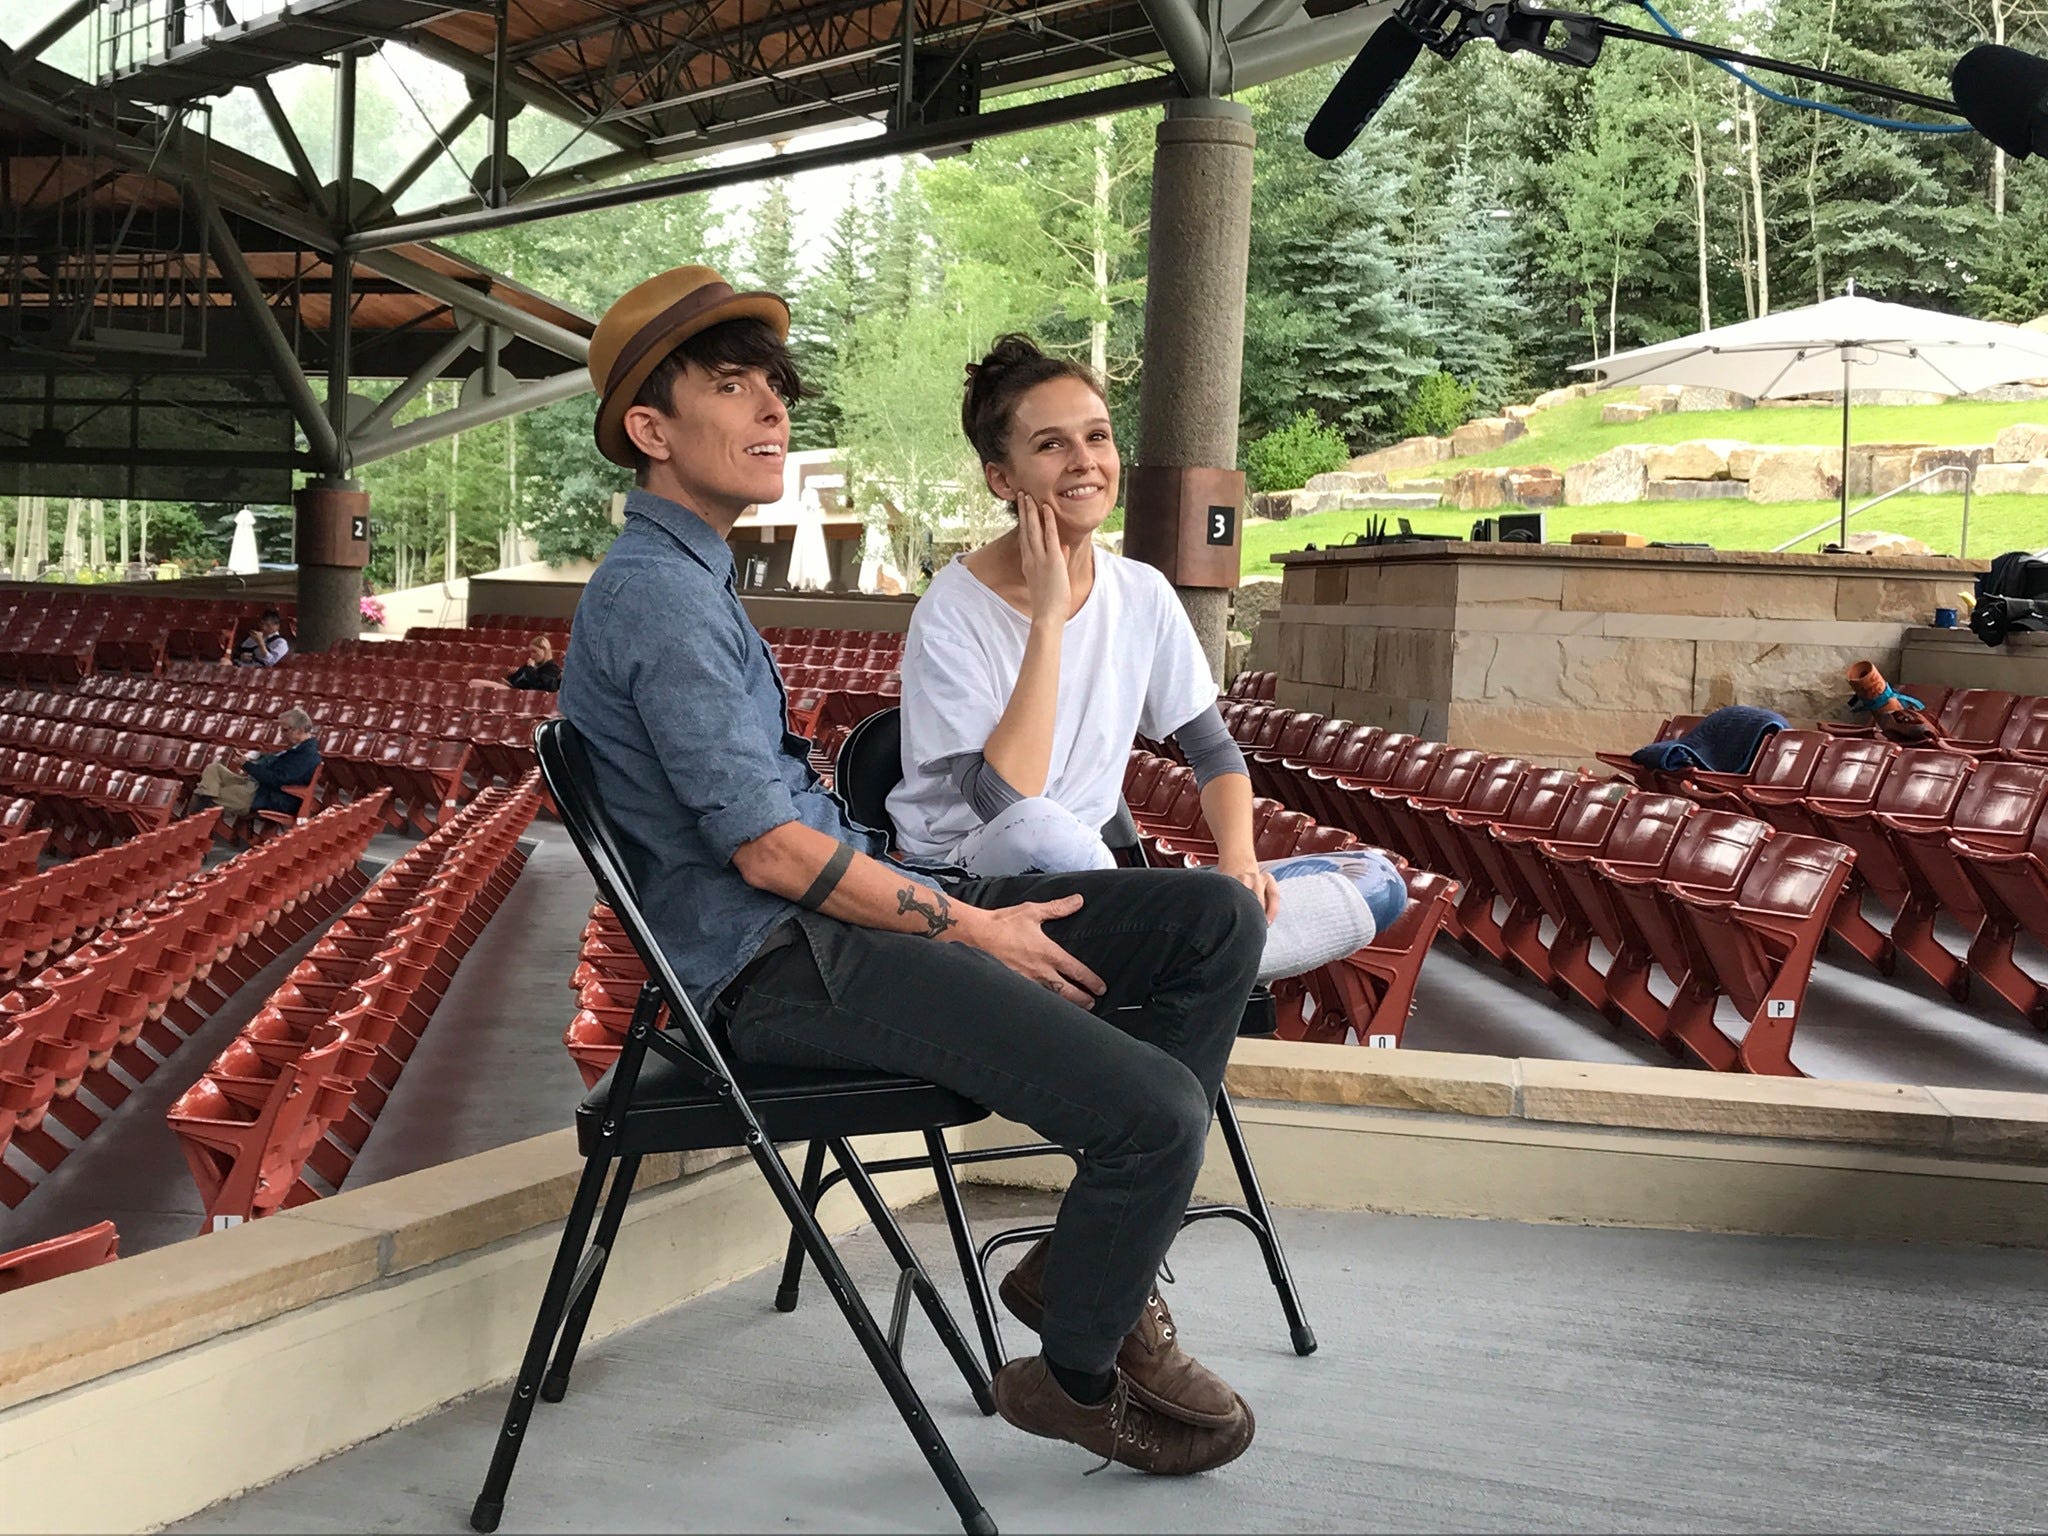 Andrea Gibson and Lauren Lovette sit on an outdoor stage at the Vail Dance Festival smiling at the camera, the chairs around them are empty and you can see mountains in the background.